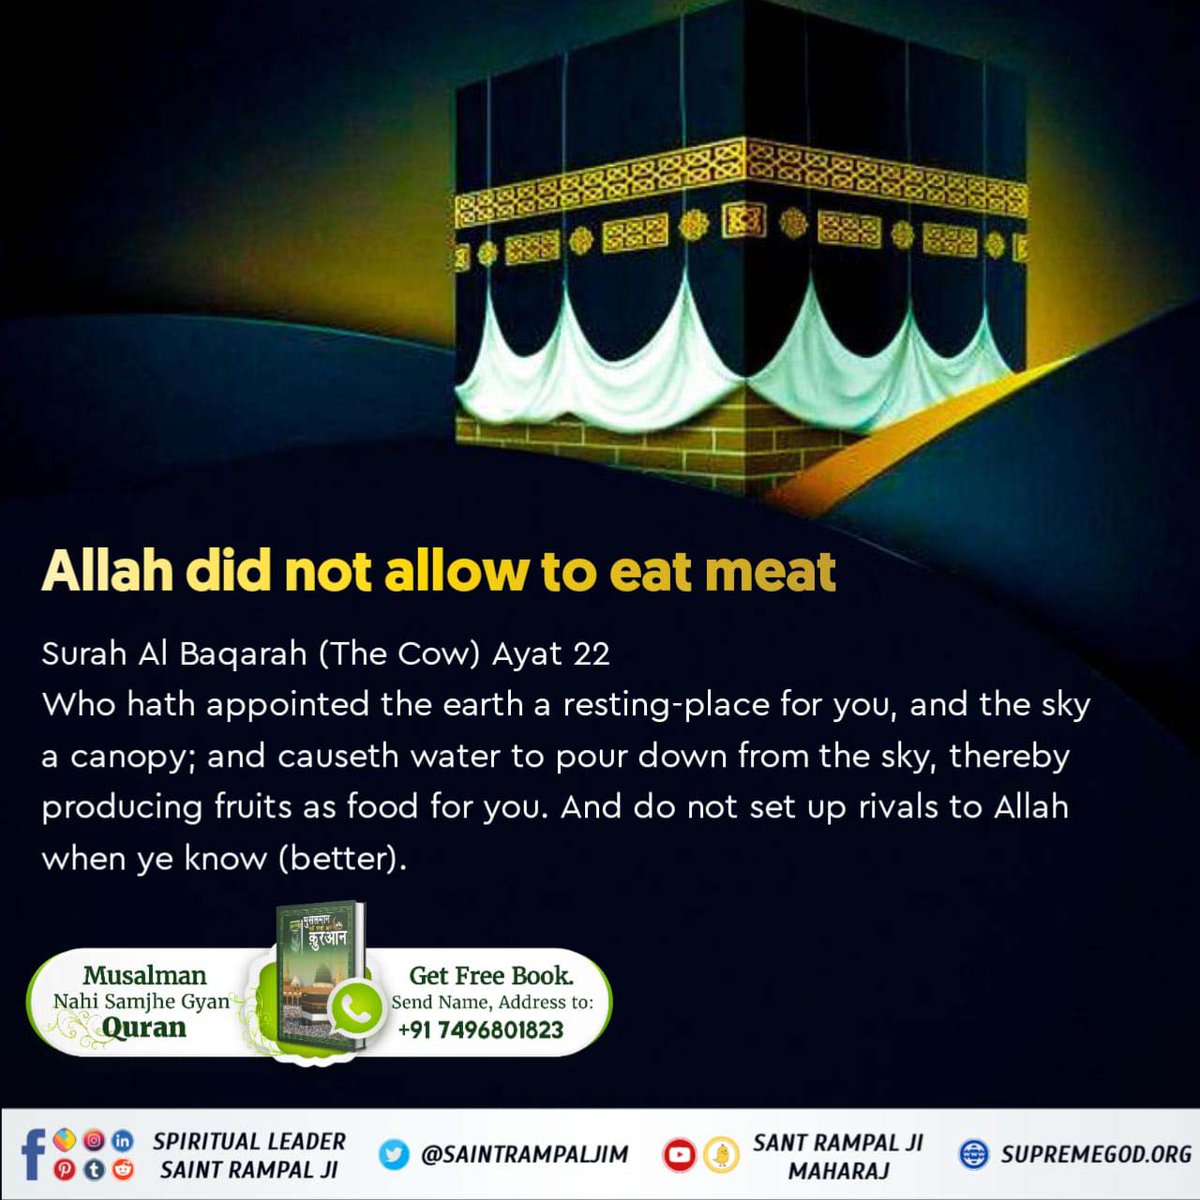 #रहम_करो_मूक_जीवों_पर
Allah Did Not Allow To Eat Meat
Surah Al Baqarah (The Cow) Ayat 22
Who hath appointed the earth a resting-place for you and the sky a canopy; and causeth water to poor down from the sky,. thereby producing fruits as found for you. 
~Baakhabar Sant Rampal Ji